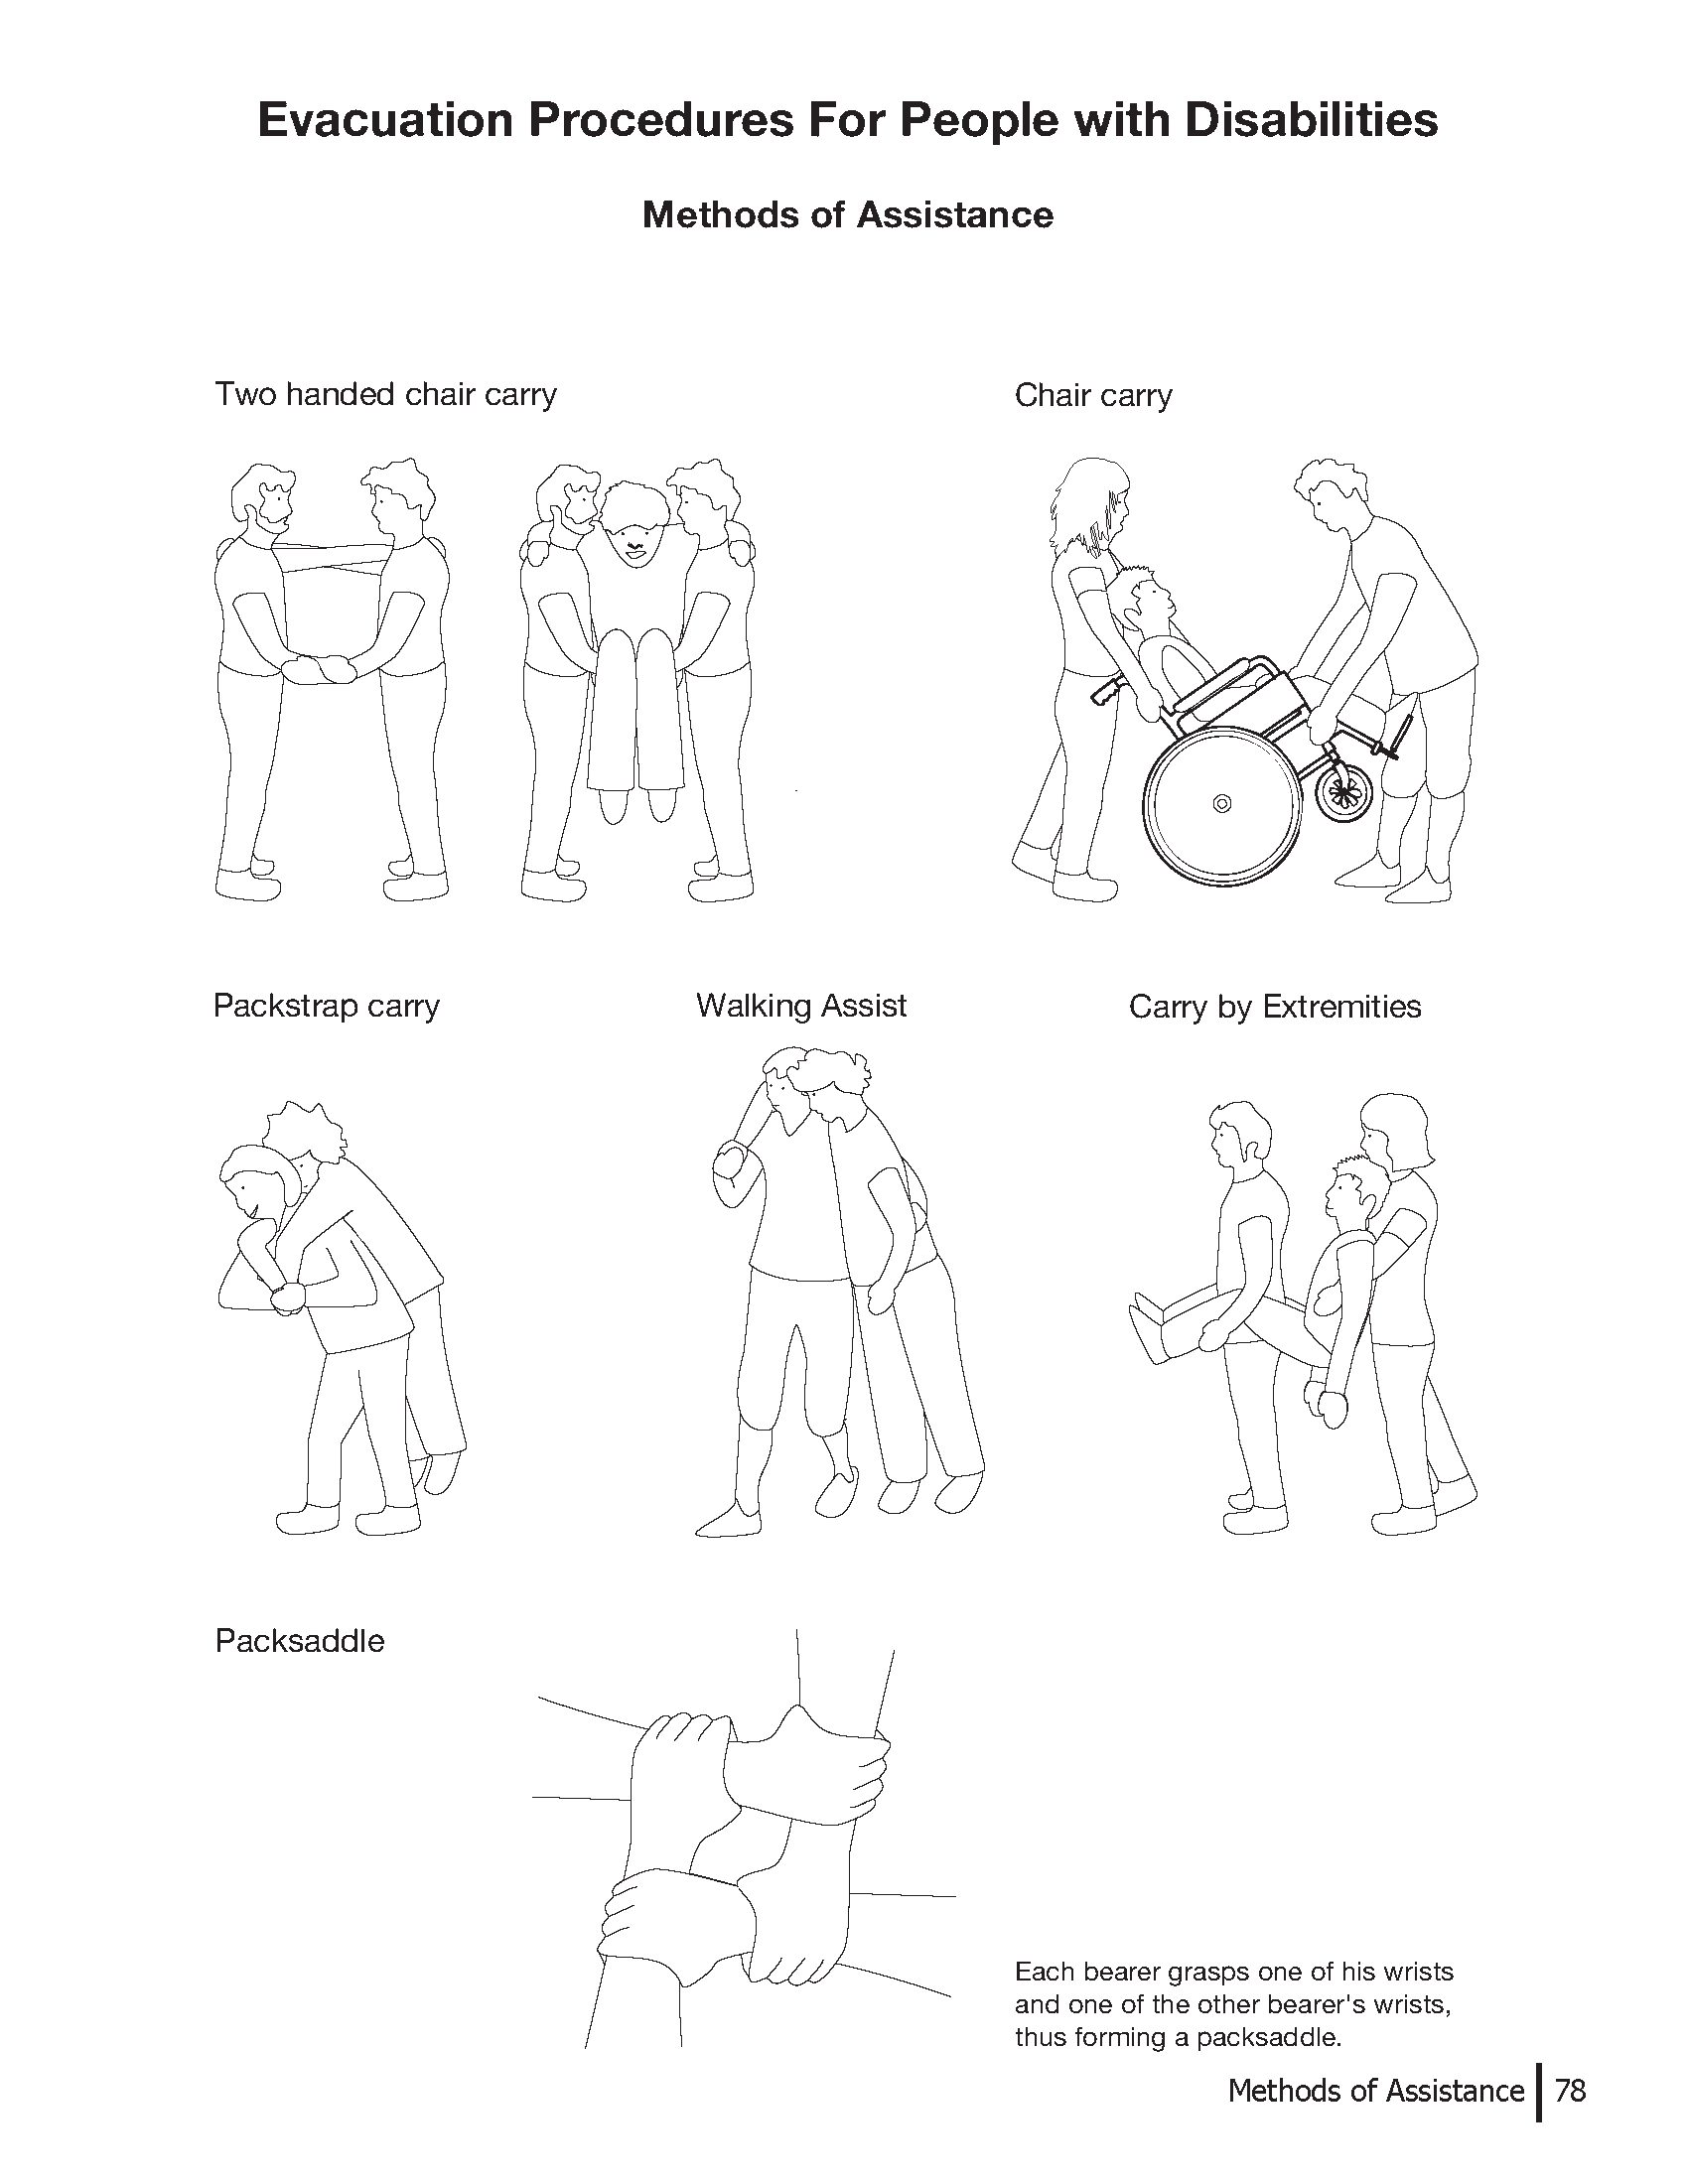 image of two-handed Chair Carry, Pack Strap Carry, Chair Carry, Walking Assist, Carry by Extremities, Packsaddle 